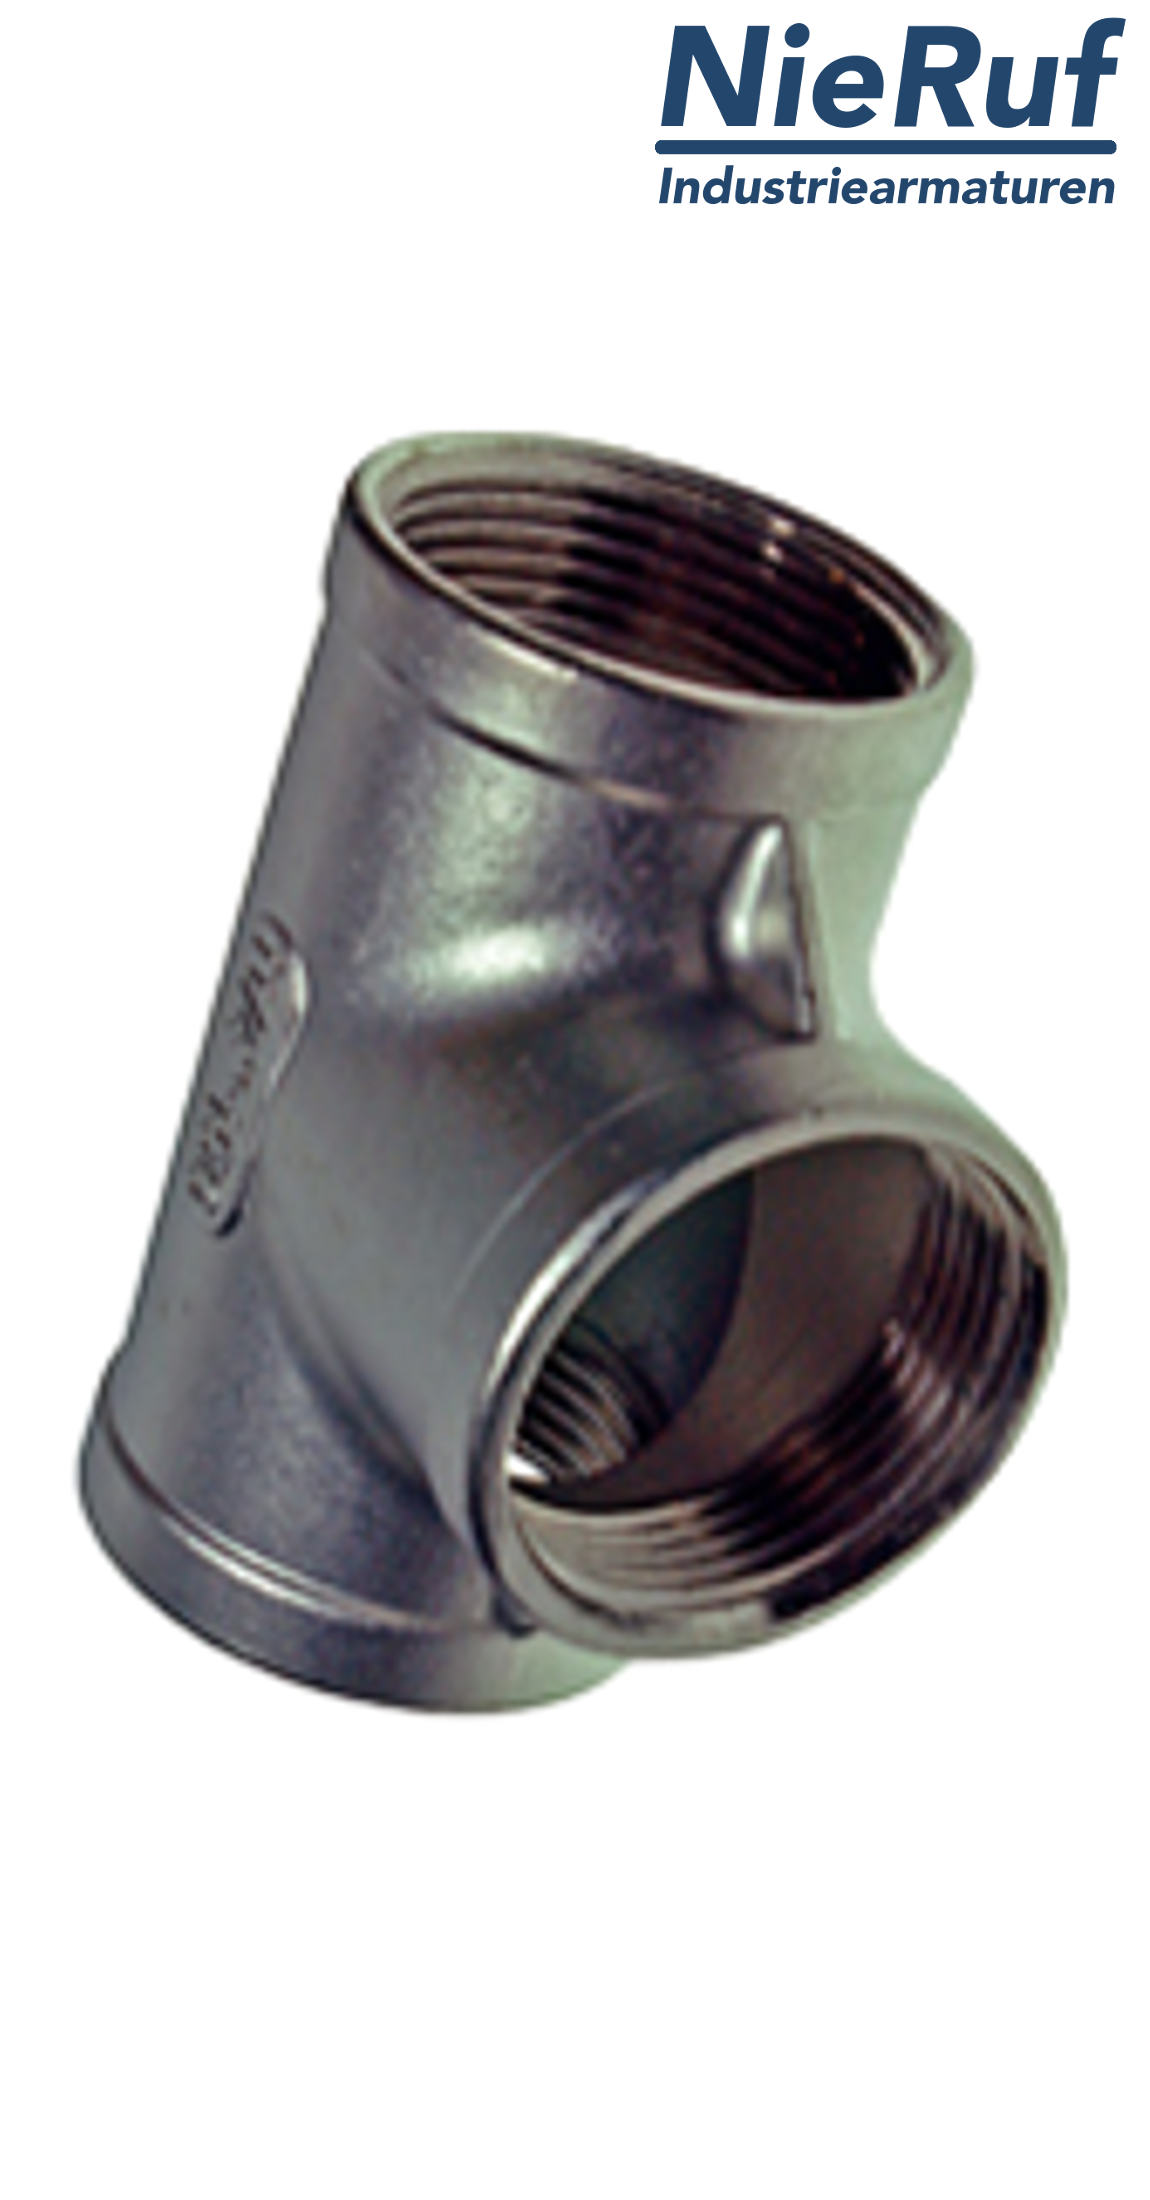 T-fitting 1/4" inch NPT stainless steel 316 90° angle FM